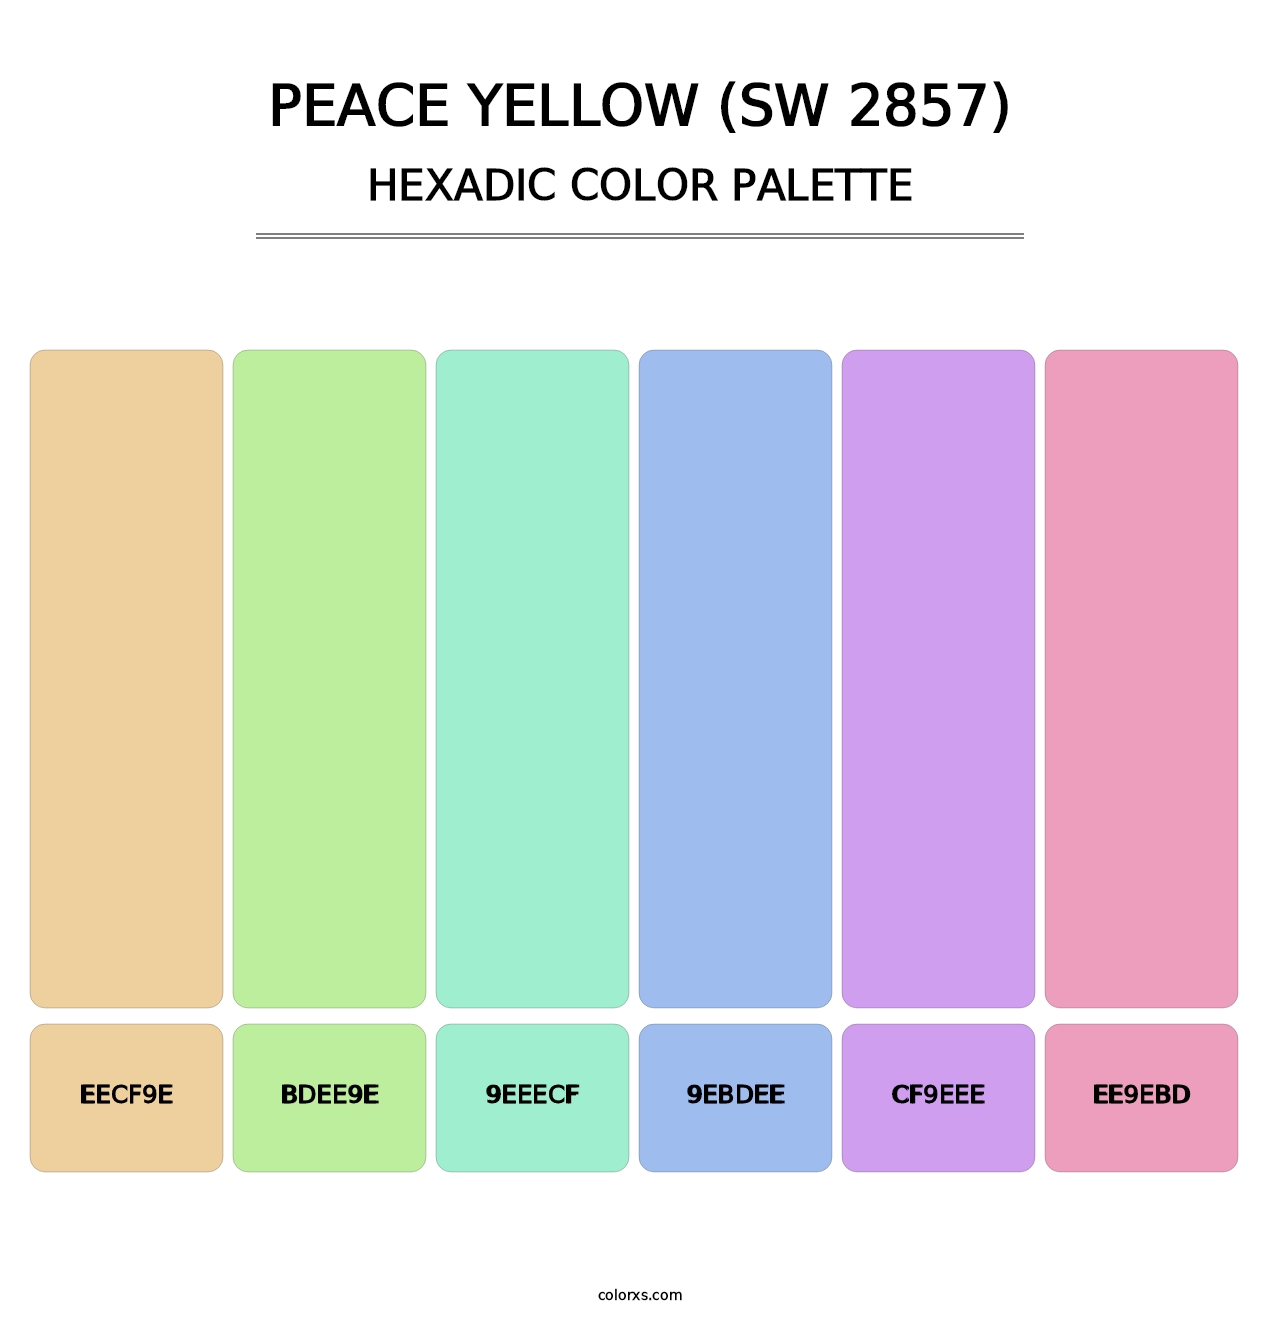 Peace Yellow (SW 2857) - Hexadic Color Palette